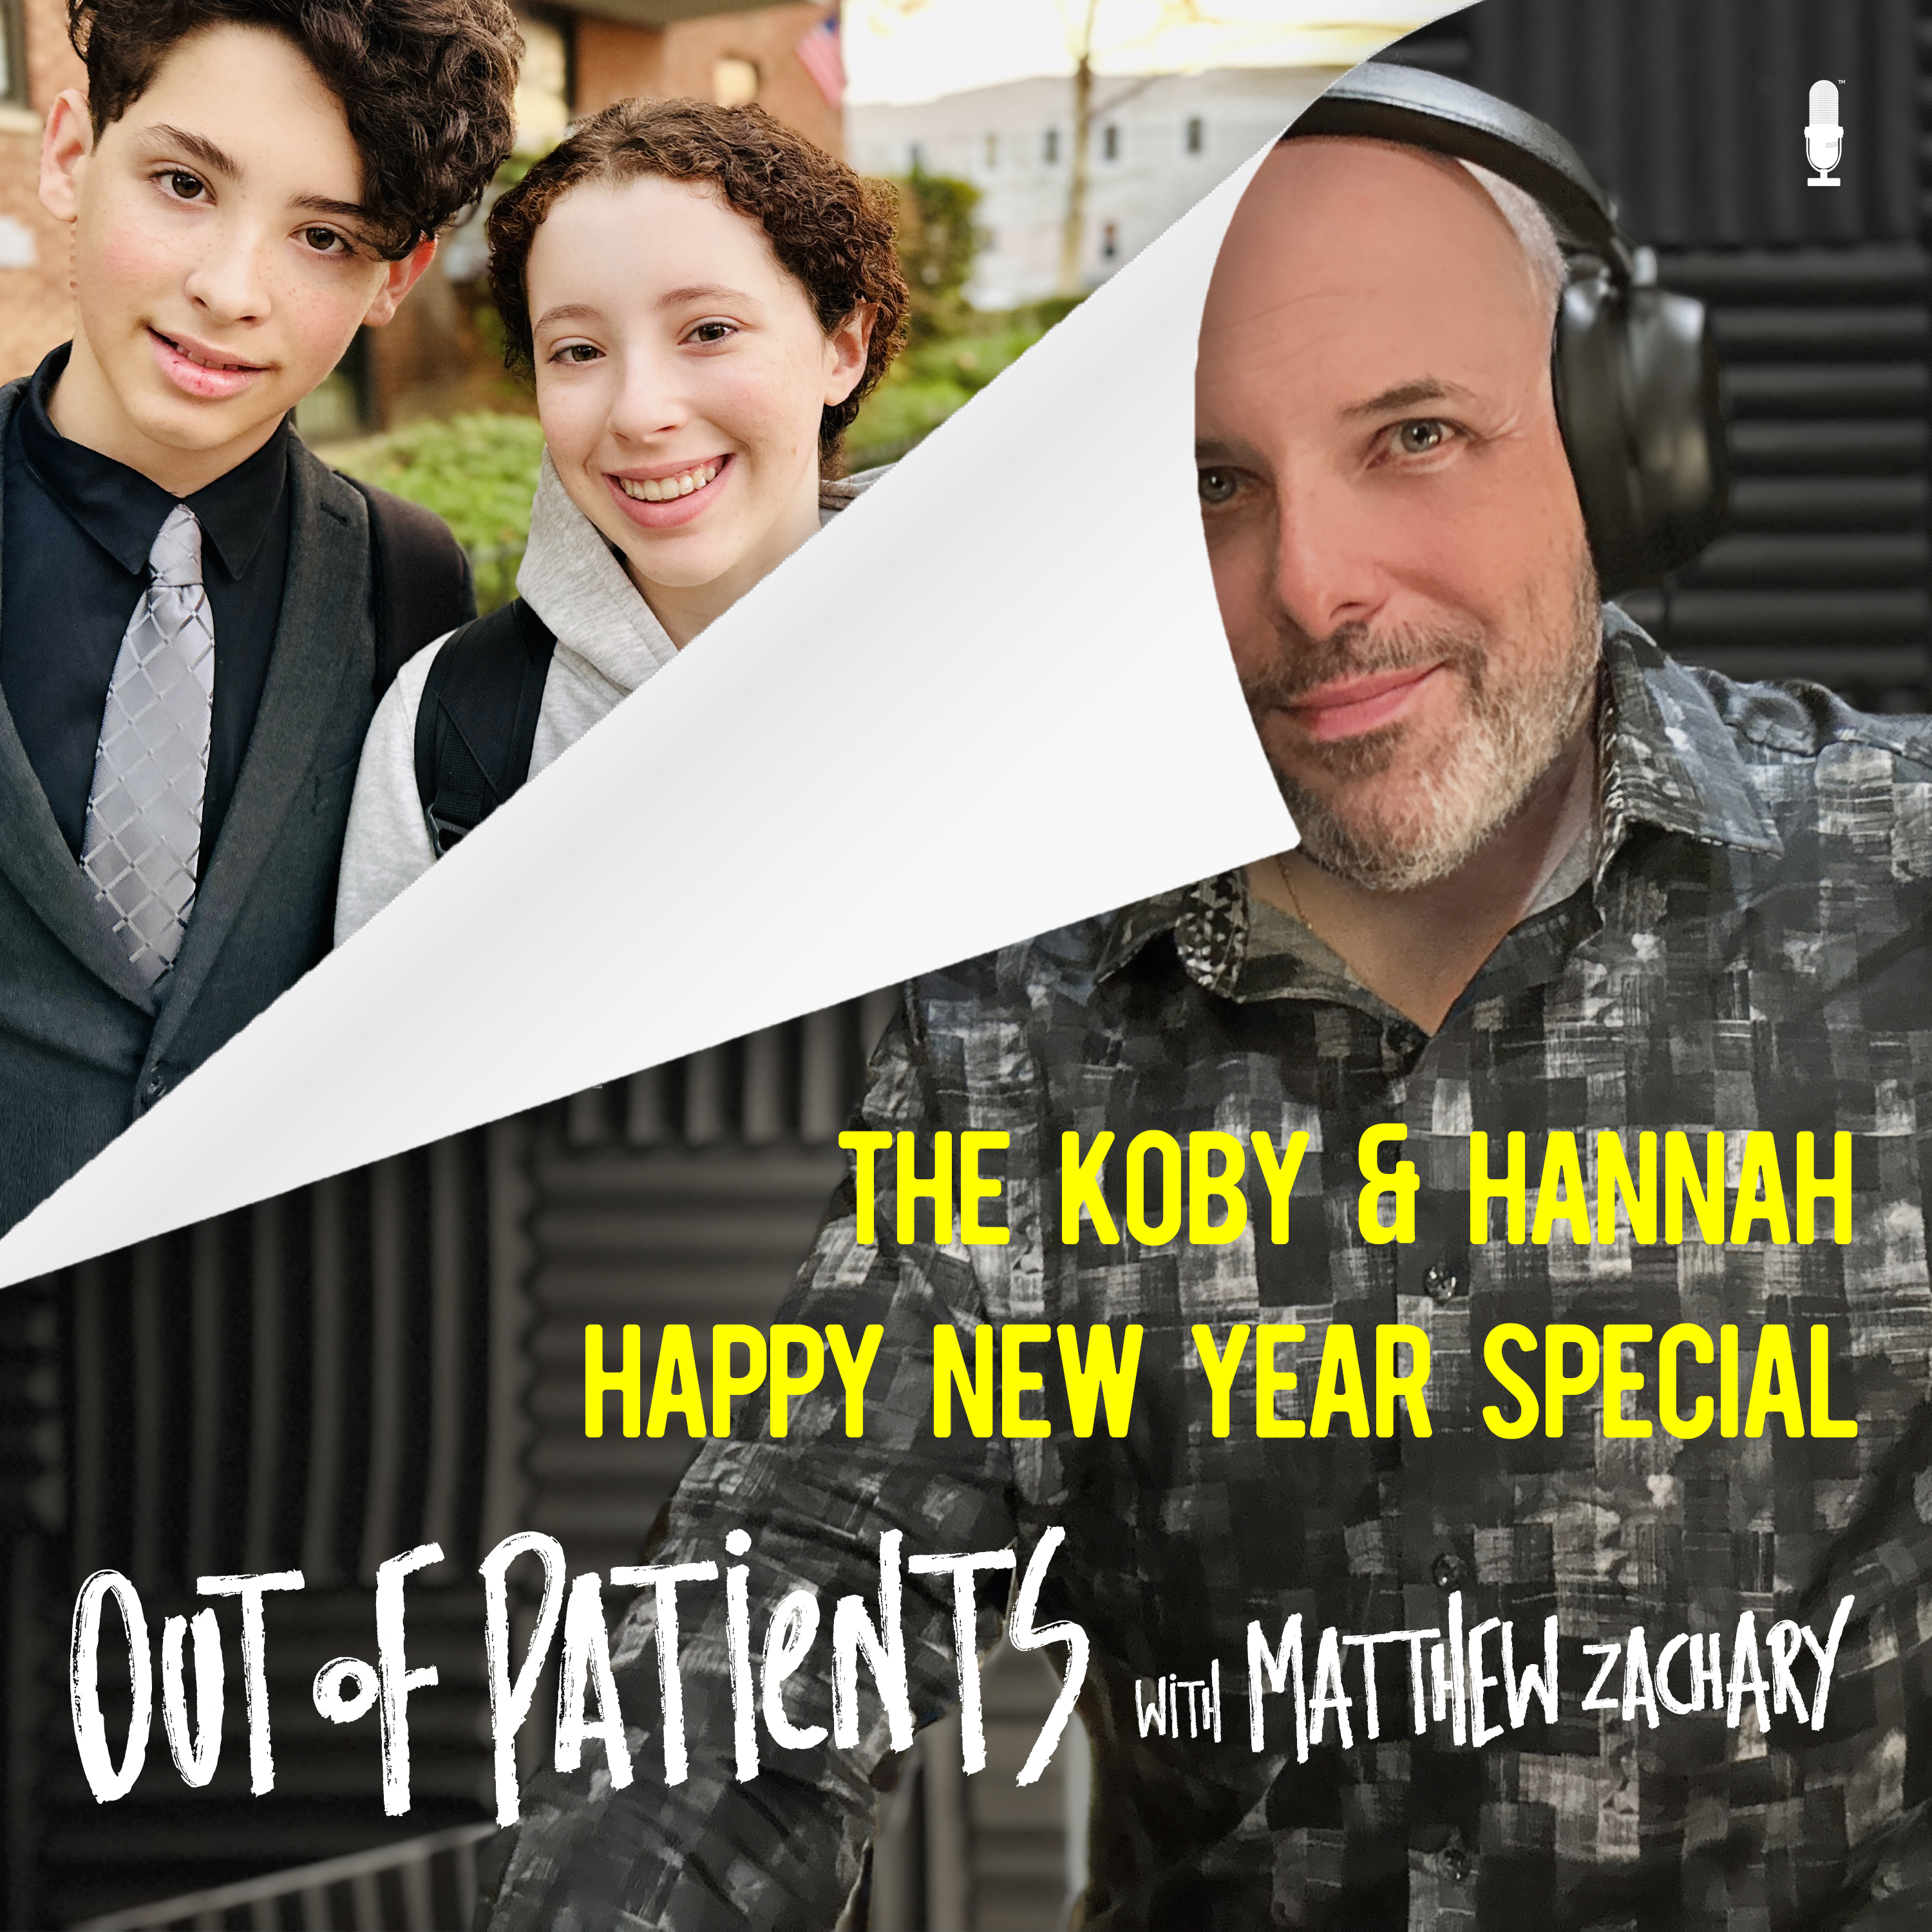 The Koby & Hannah 2024 New Year's Special!